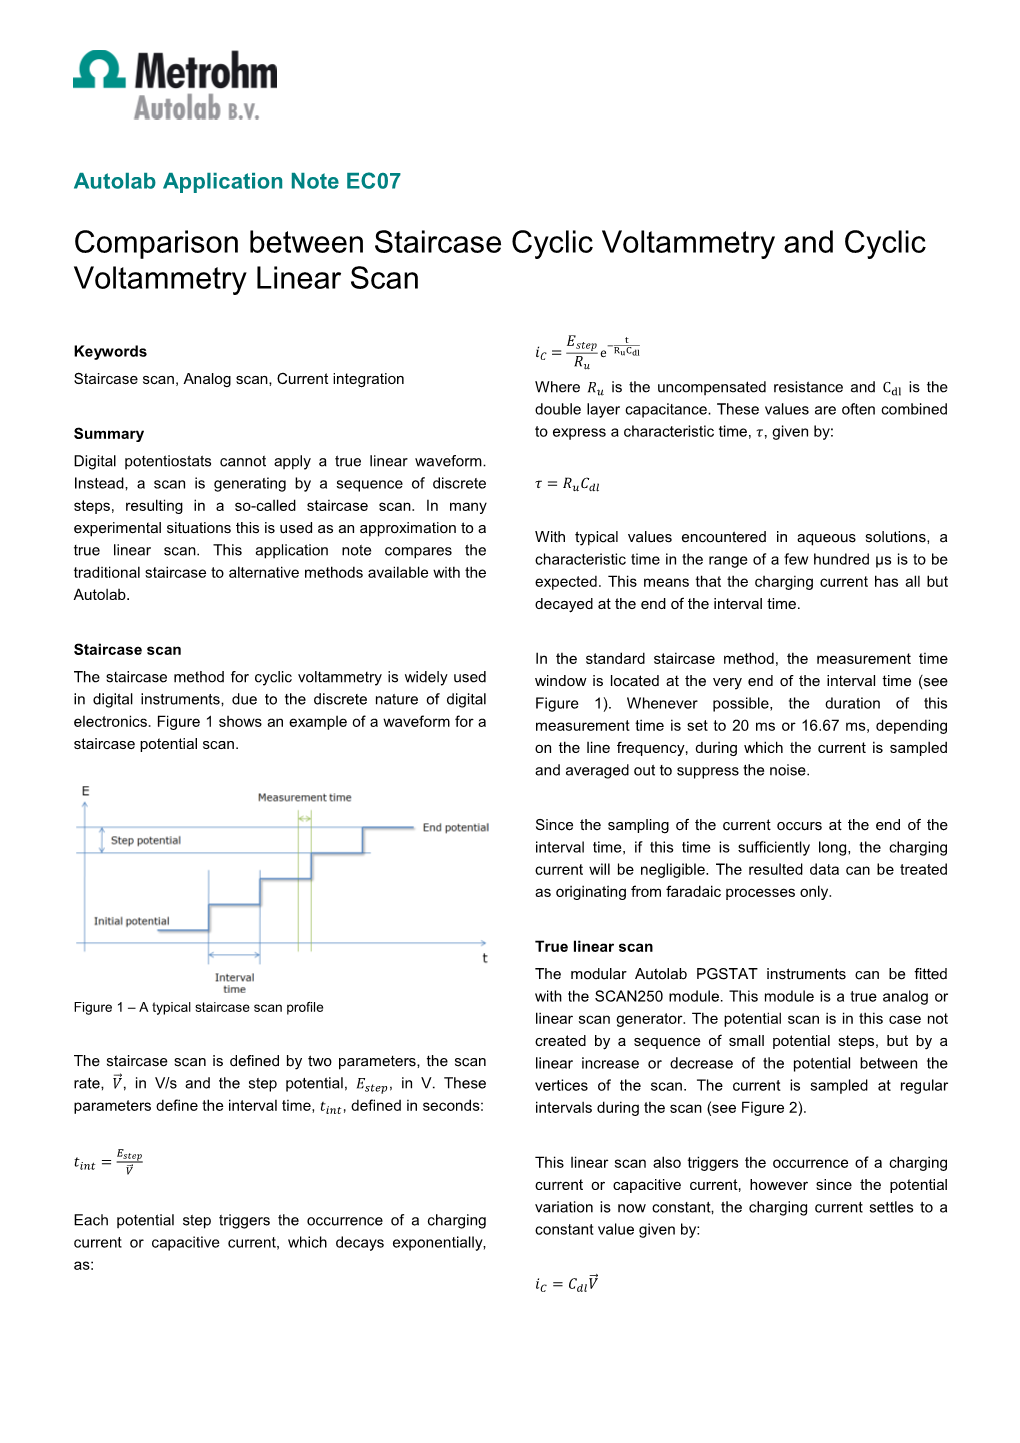 Comparison Between Staircase Cyclic Voltammetry and Cyclic Voltammetry Linear Scan